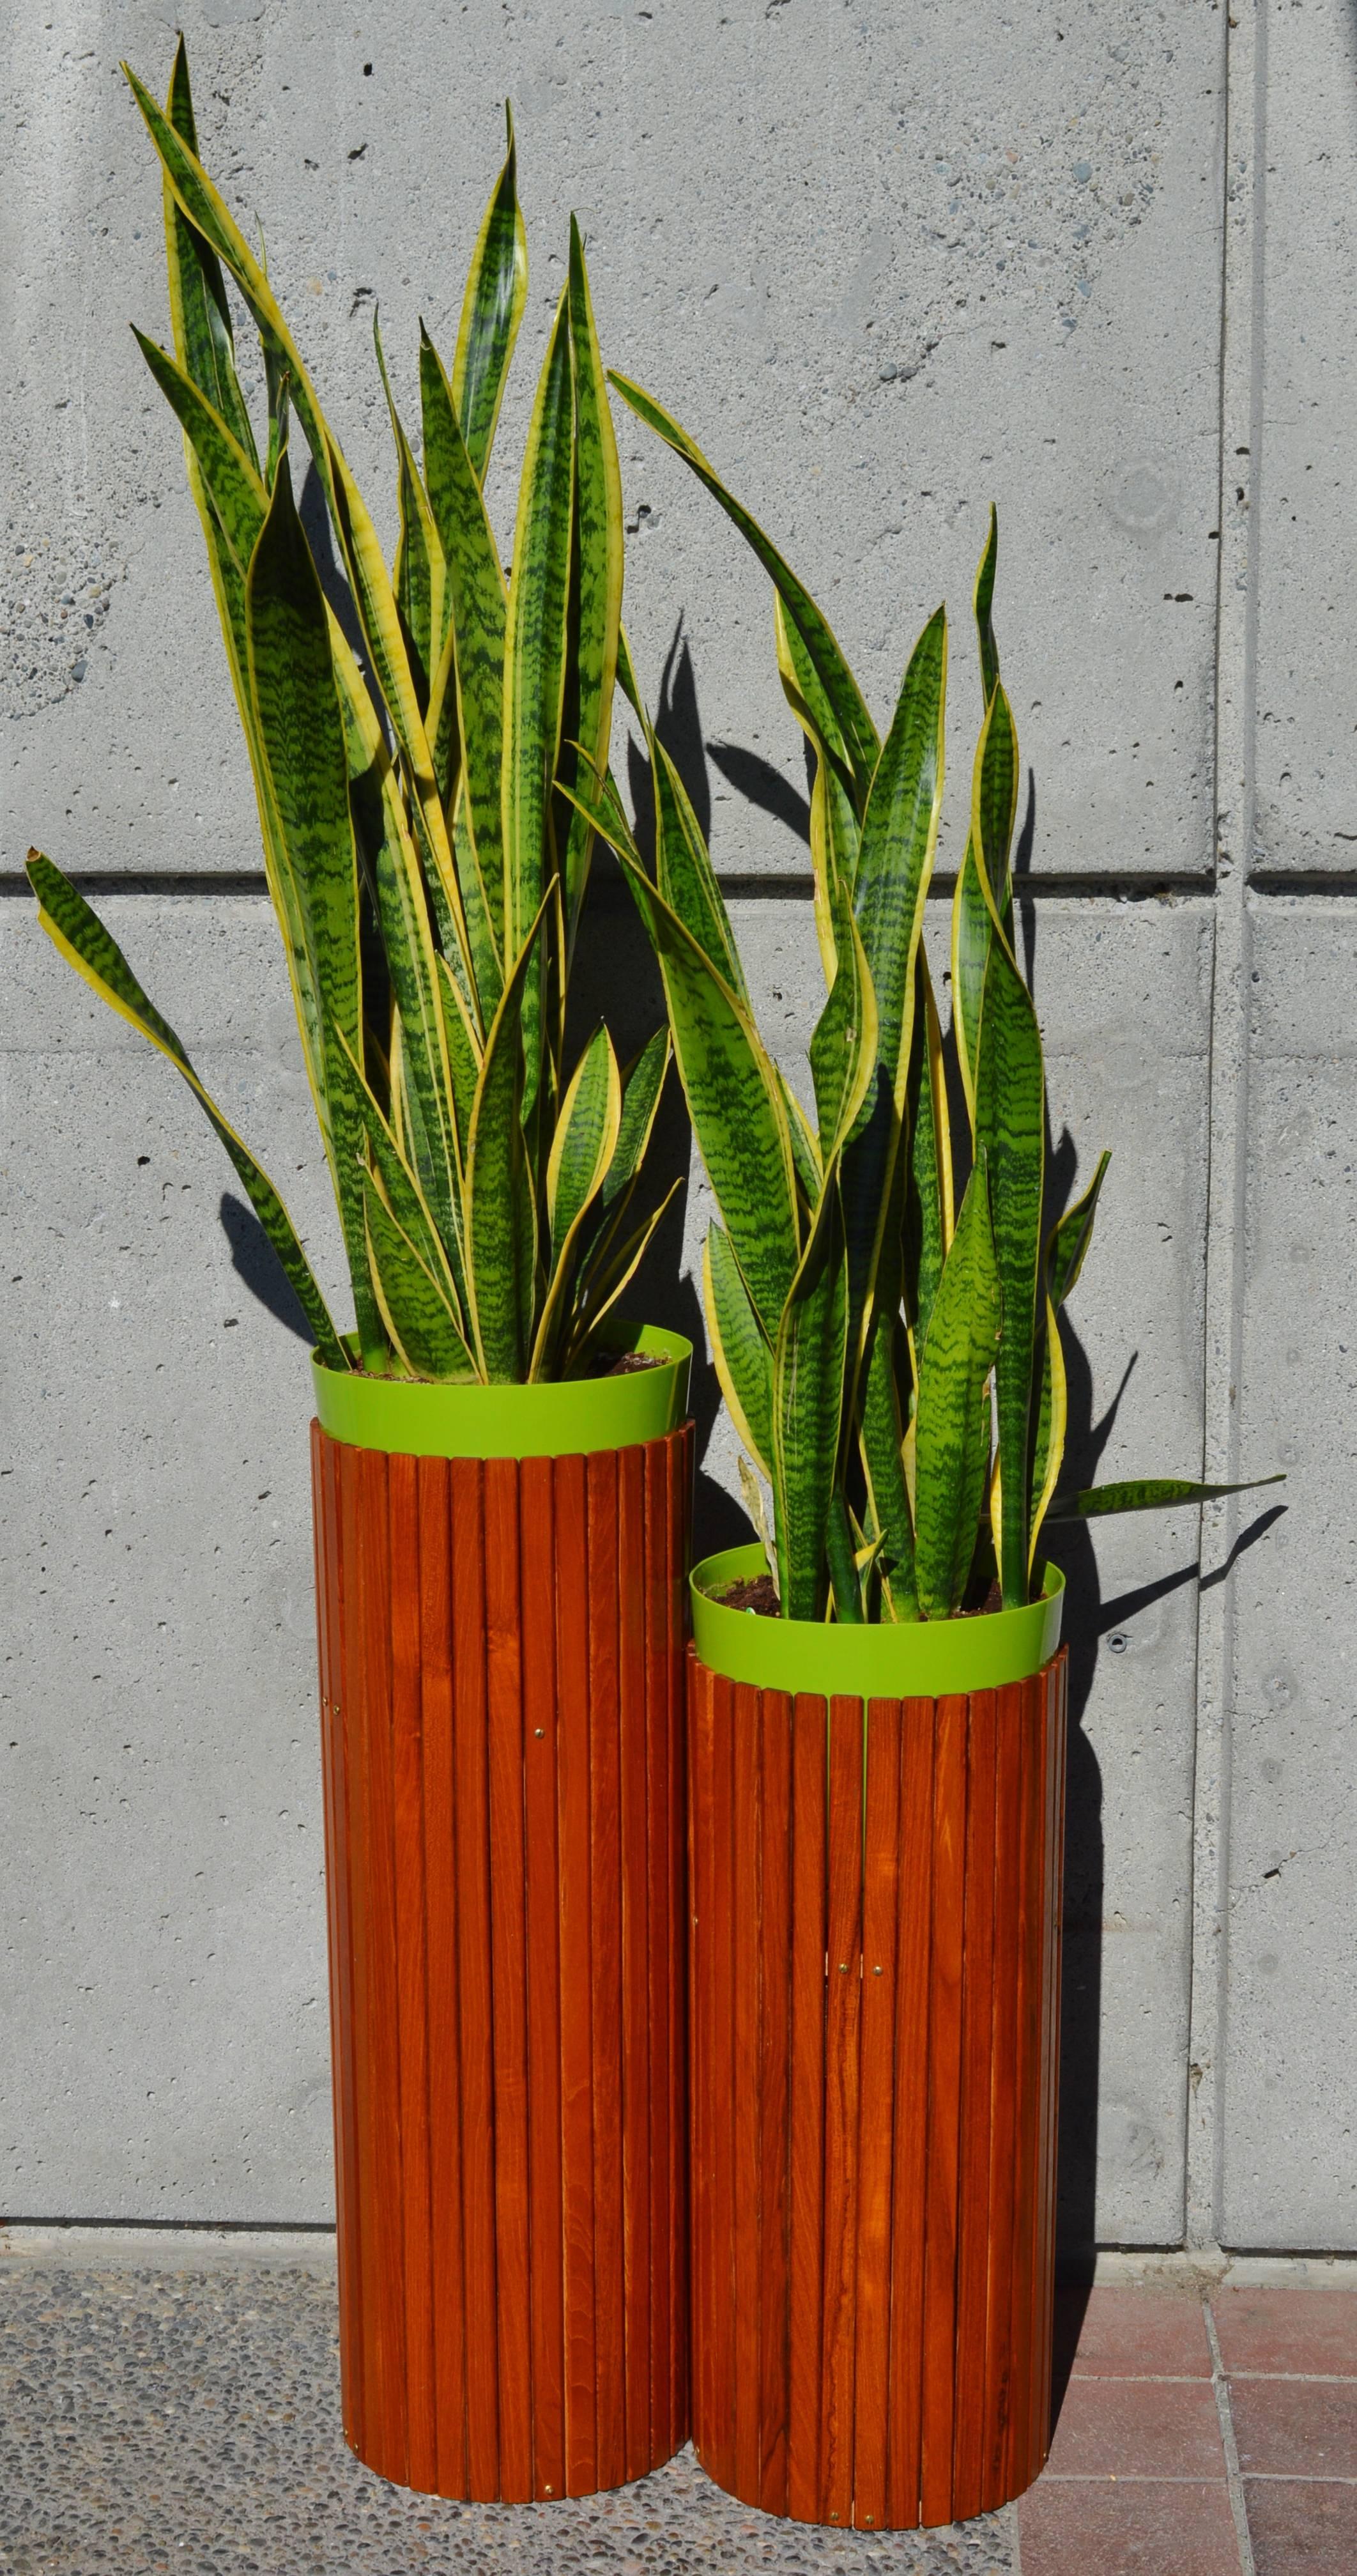 This unique pair of Danish modern teak planters are made up of teak slats with brass screws and with a teak veneer platform inside to support the plants. The plants and green plastic pots are not included but are simply there for demonstration